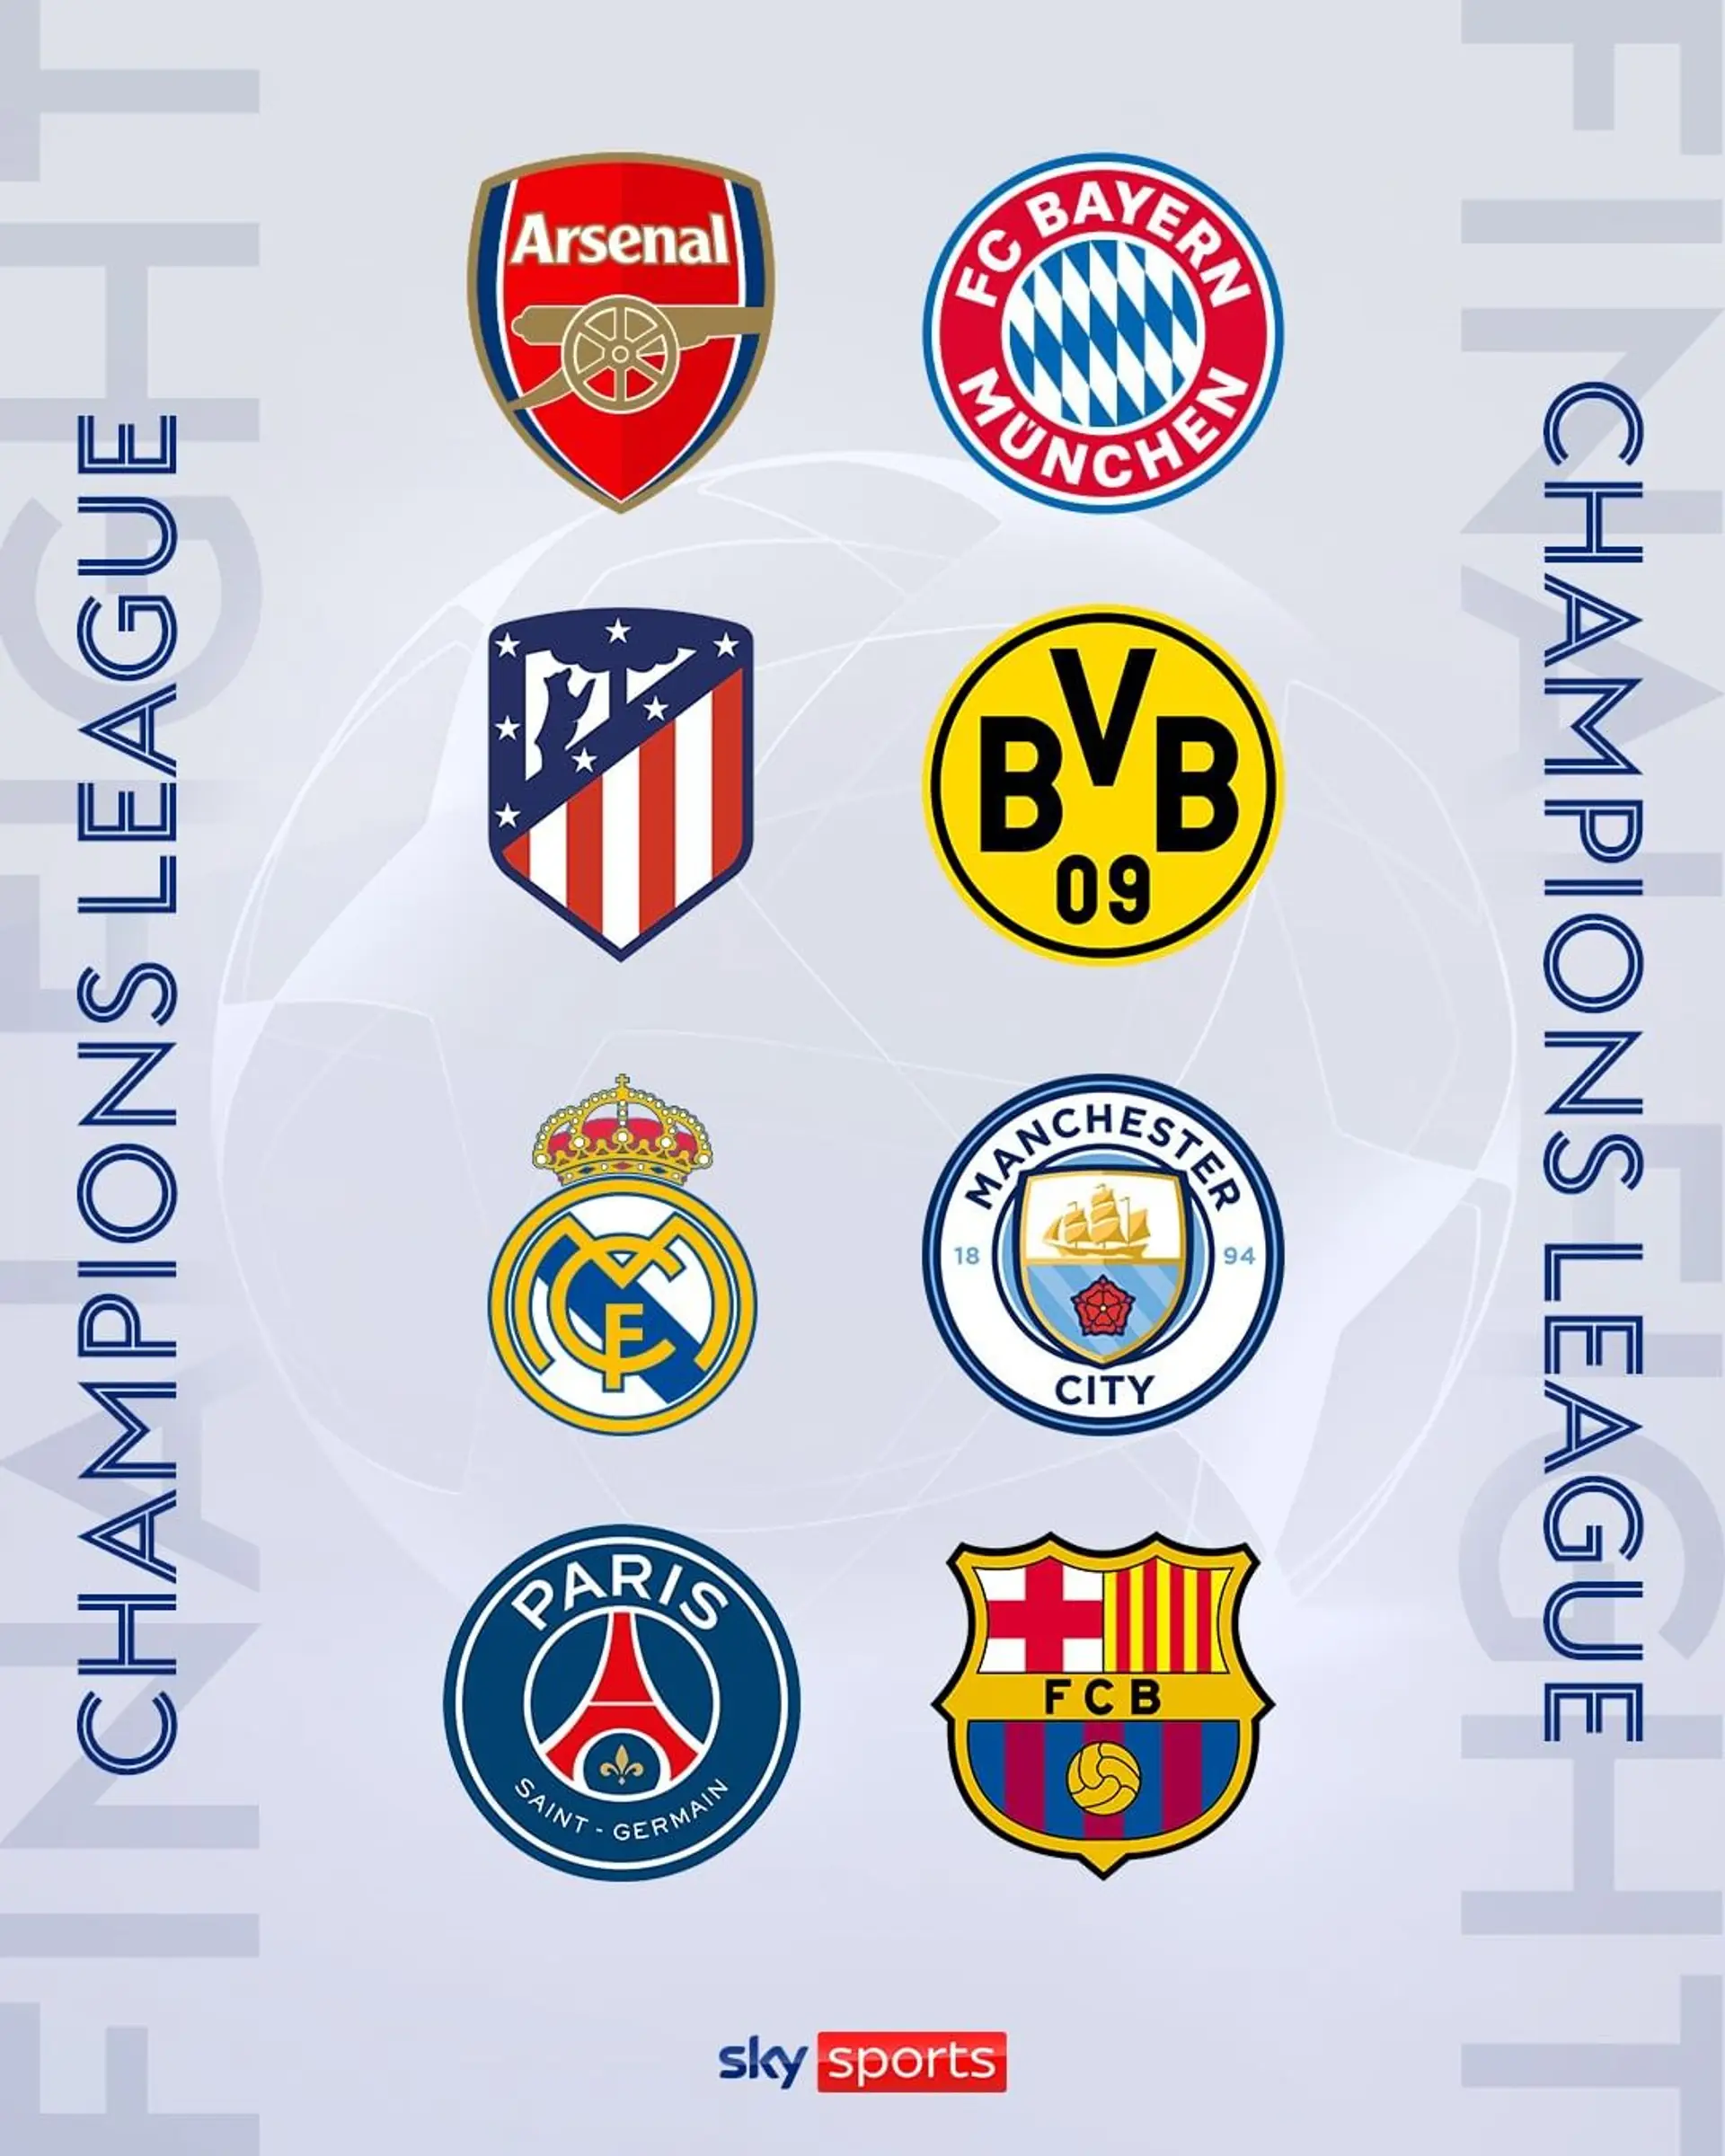 The draws for the Champions League Quarter Finals and Semi Finals have just been made. Let us know your thoughts on the comment section 